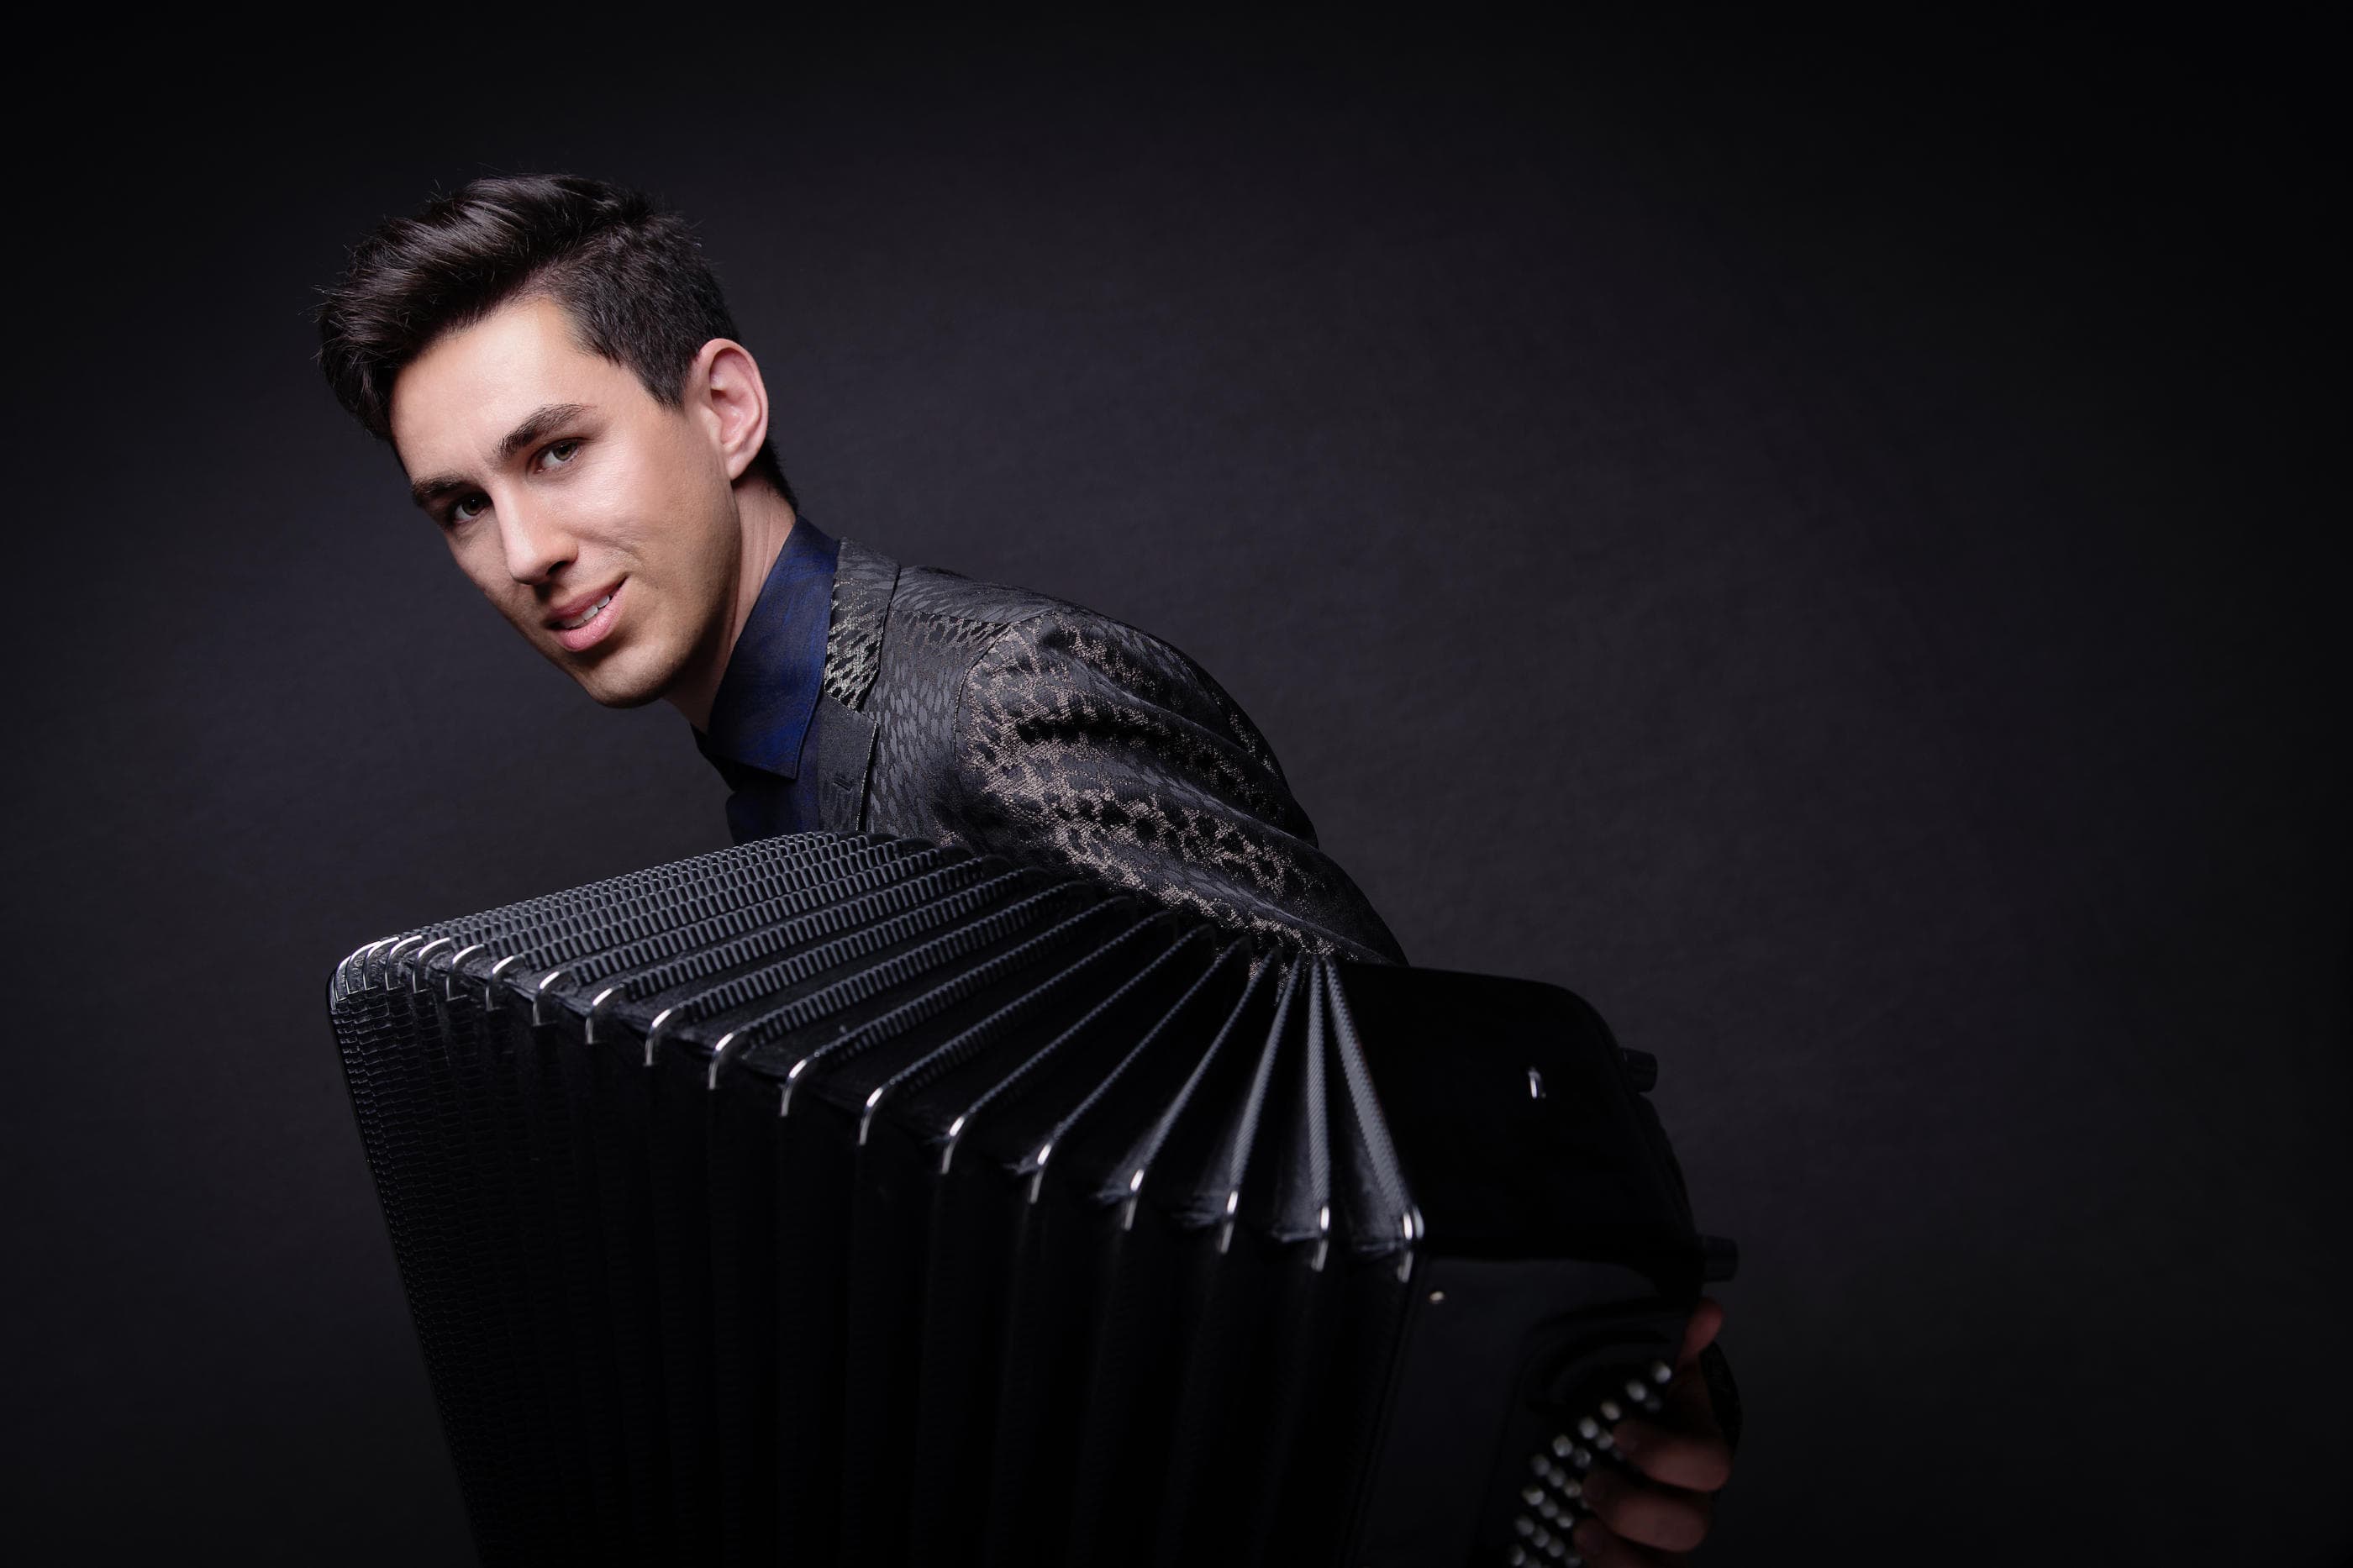 A photo of one of the members of Bridge and Wolak Duo, smiling while holding an accordion.